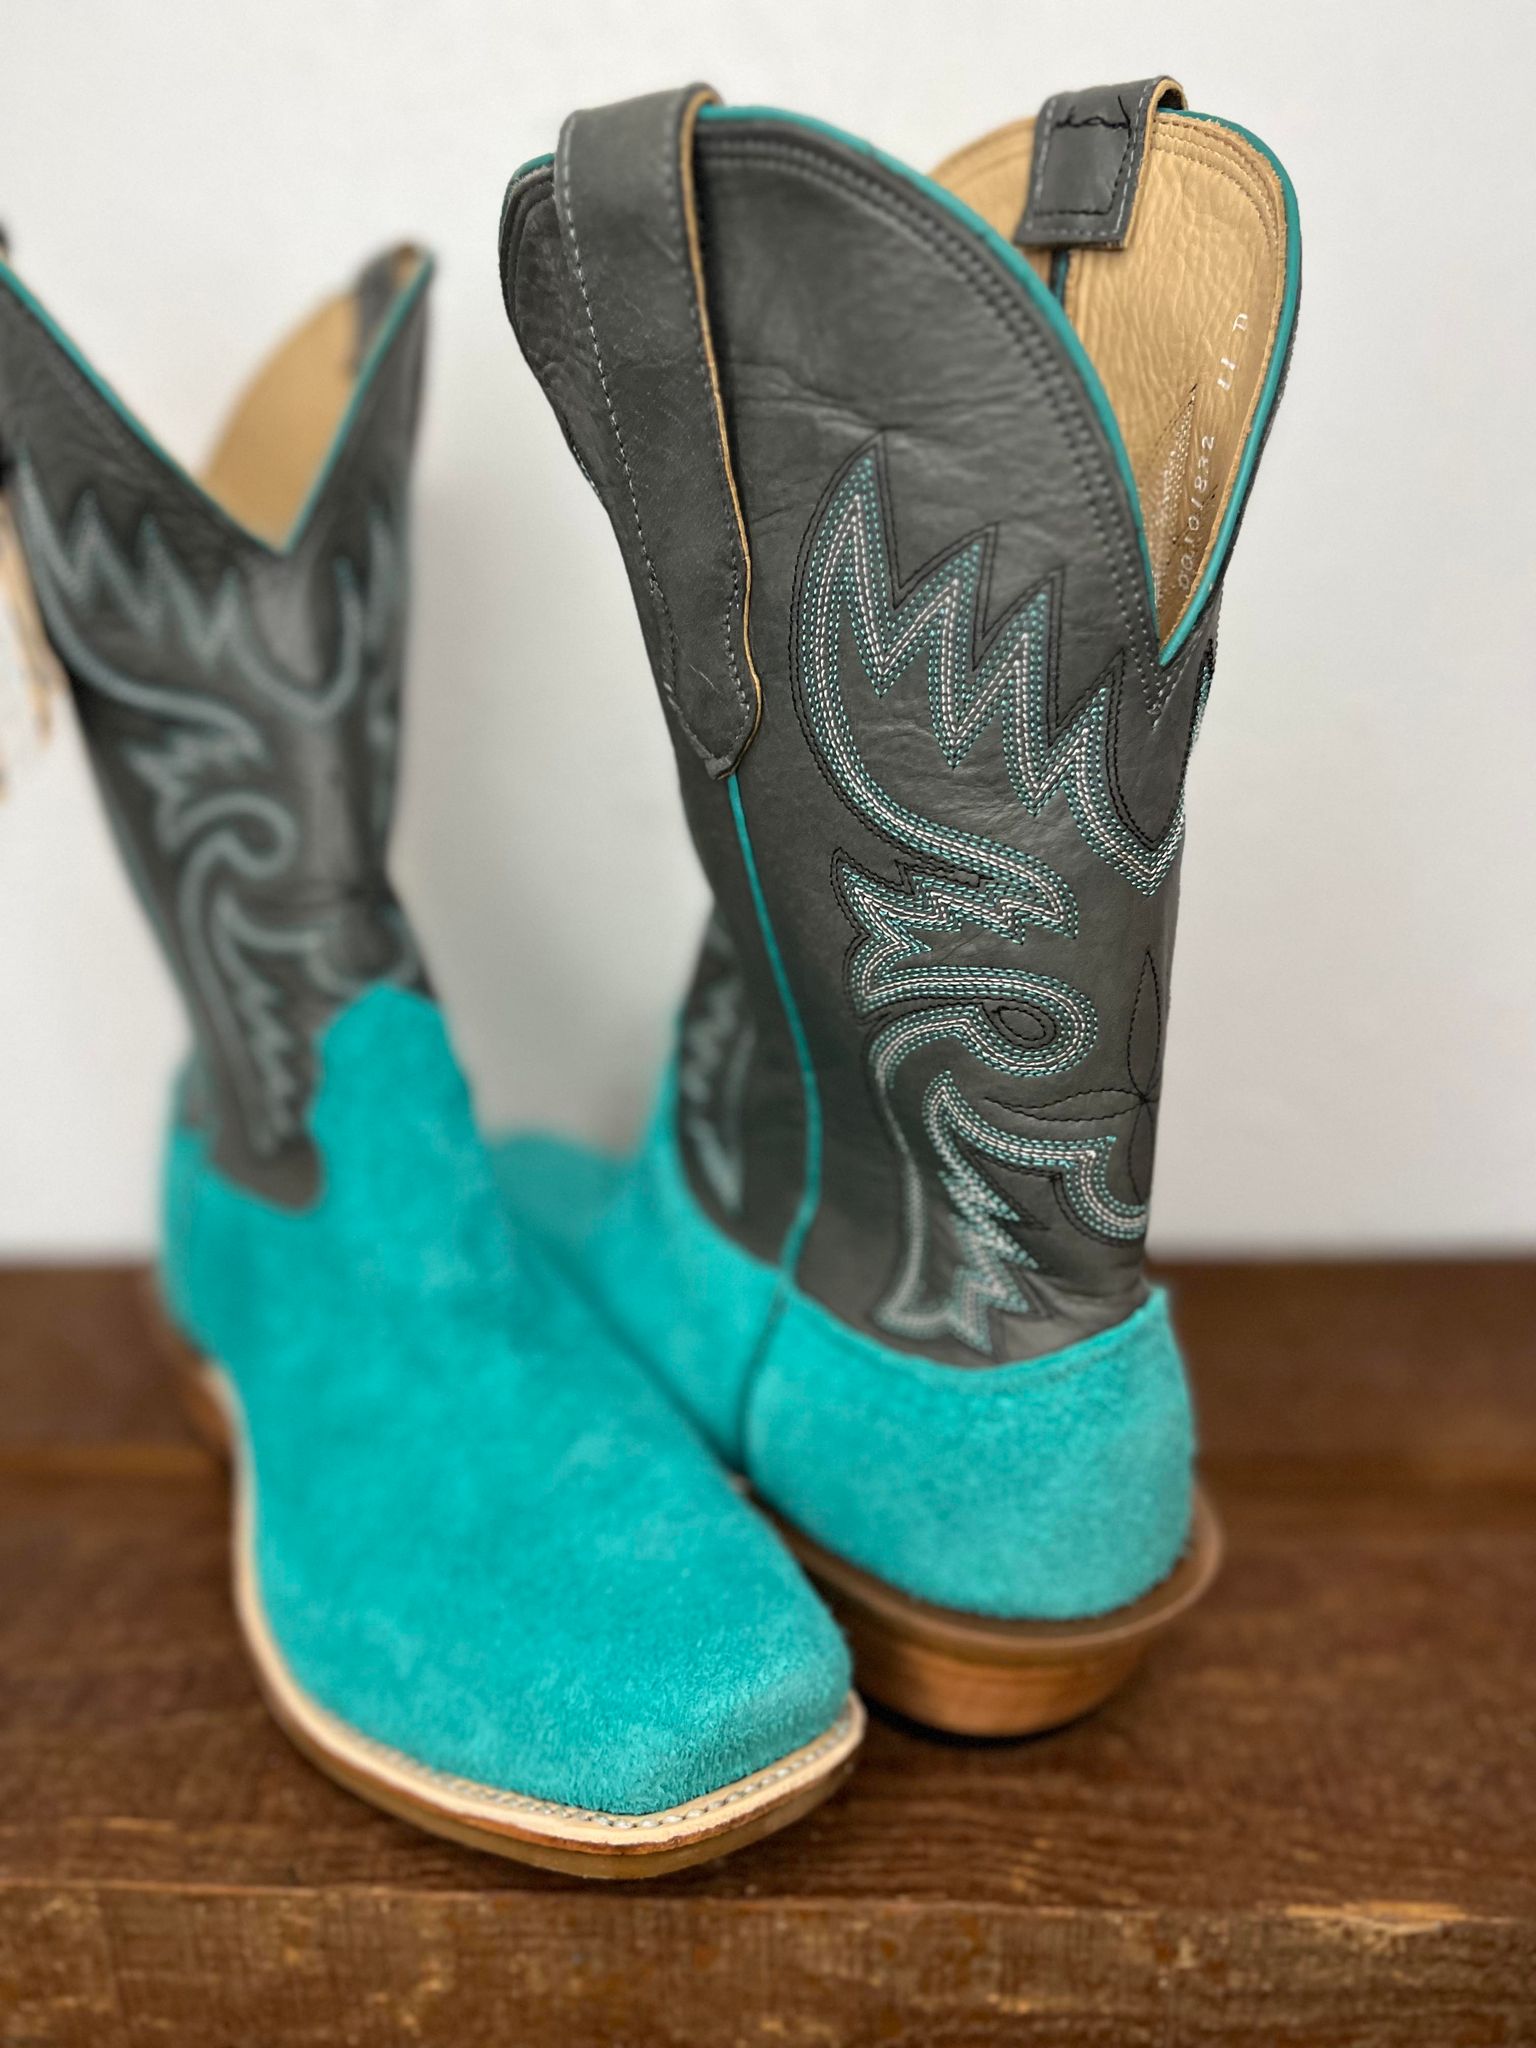 Men's Fenoglio Turquoise Moto Roughout W/ Space Grey-Men's Boots-Fenoglio Boots-Lucky J Boots & More, Women's, Men's, & Kids Western Store Located in Carthage, MO